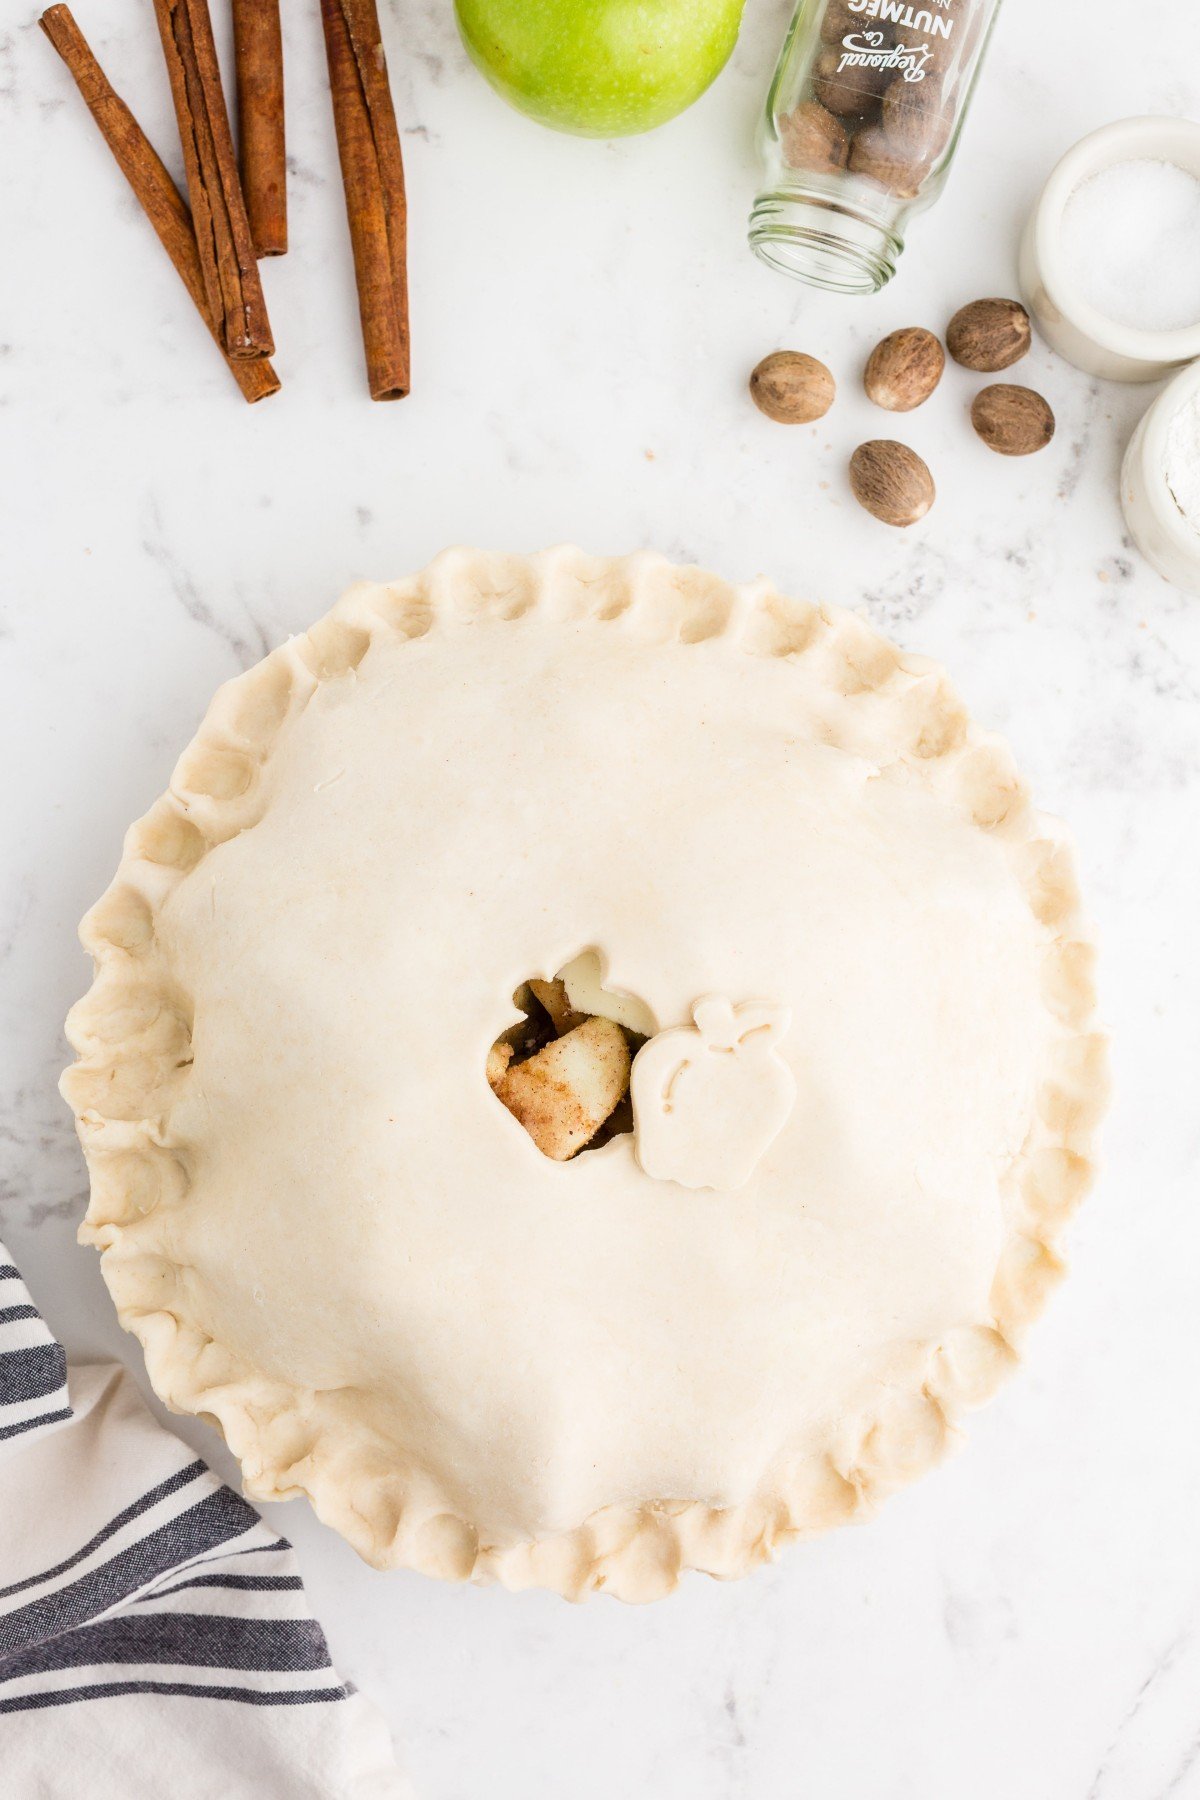 Unbaked Butter Crust Pie filled with apple pie filling and topped with a pie crust topping, grey and white striped kitchen linen, apple, cinnamon sticks, whole nutmegs, atop a marble countertop